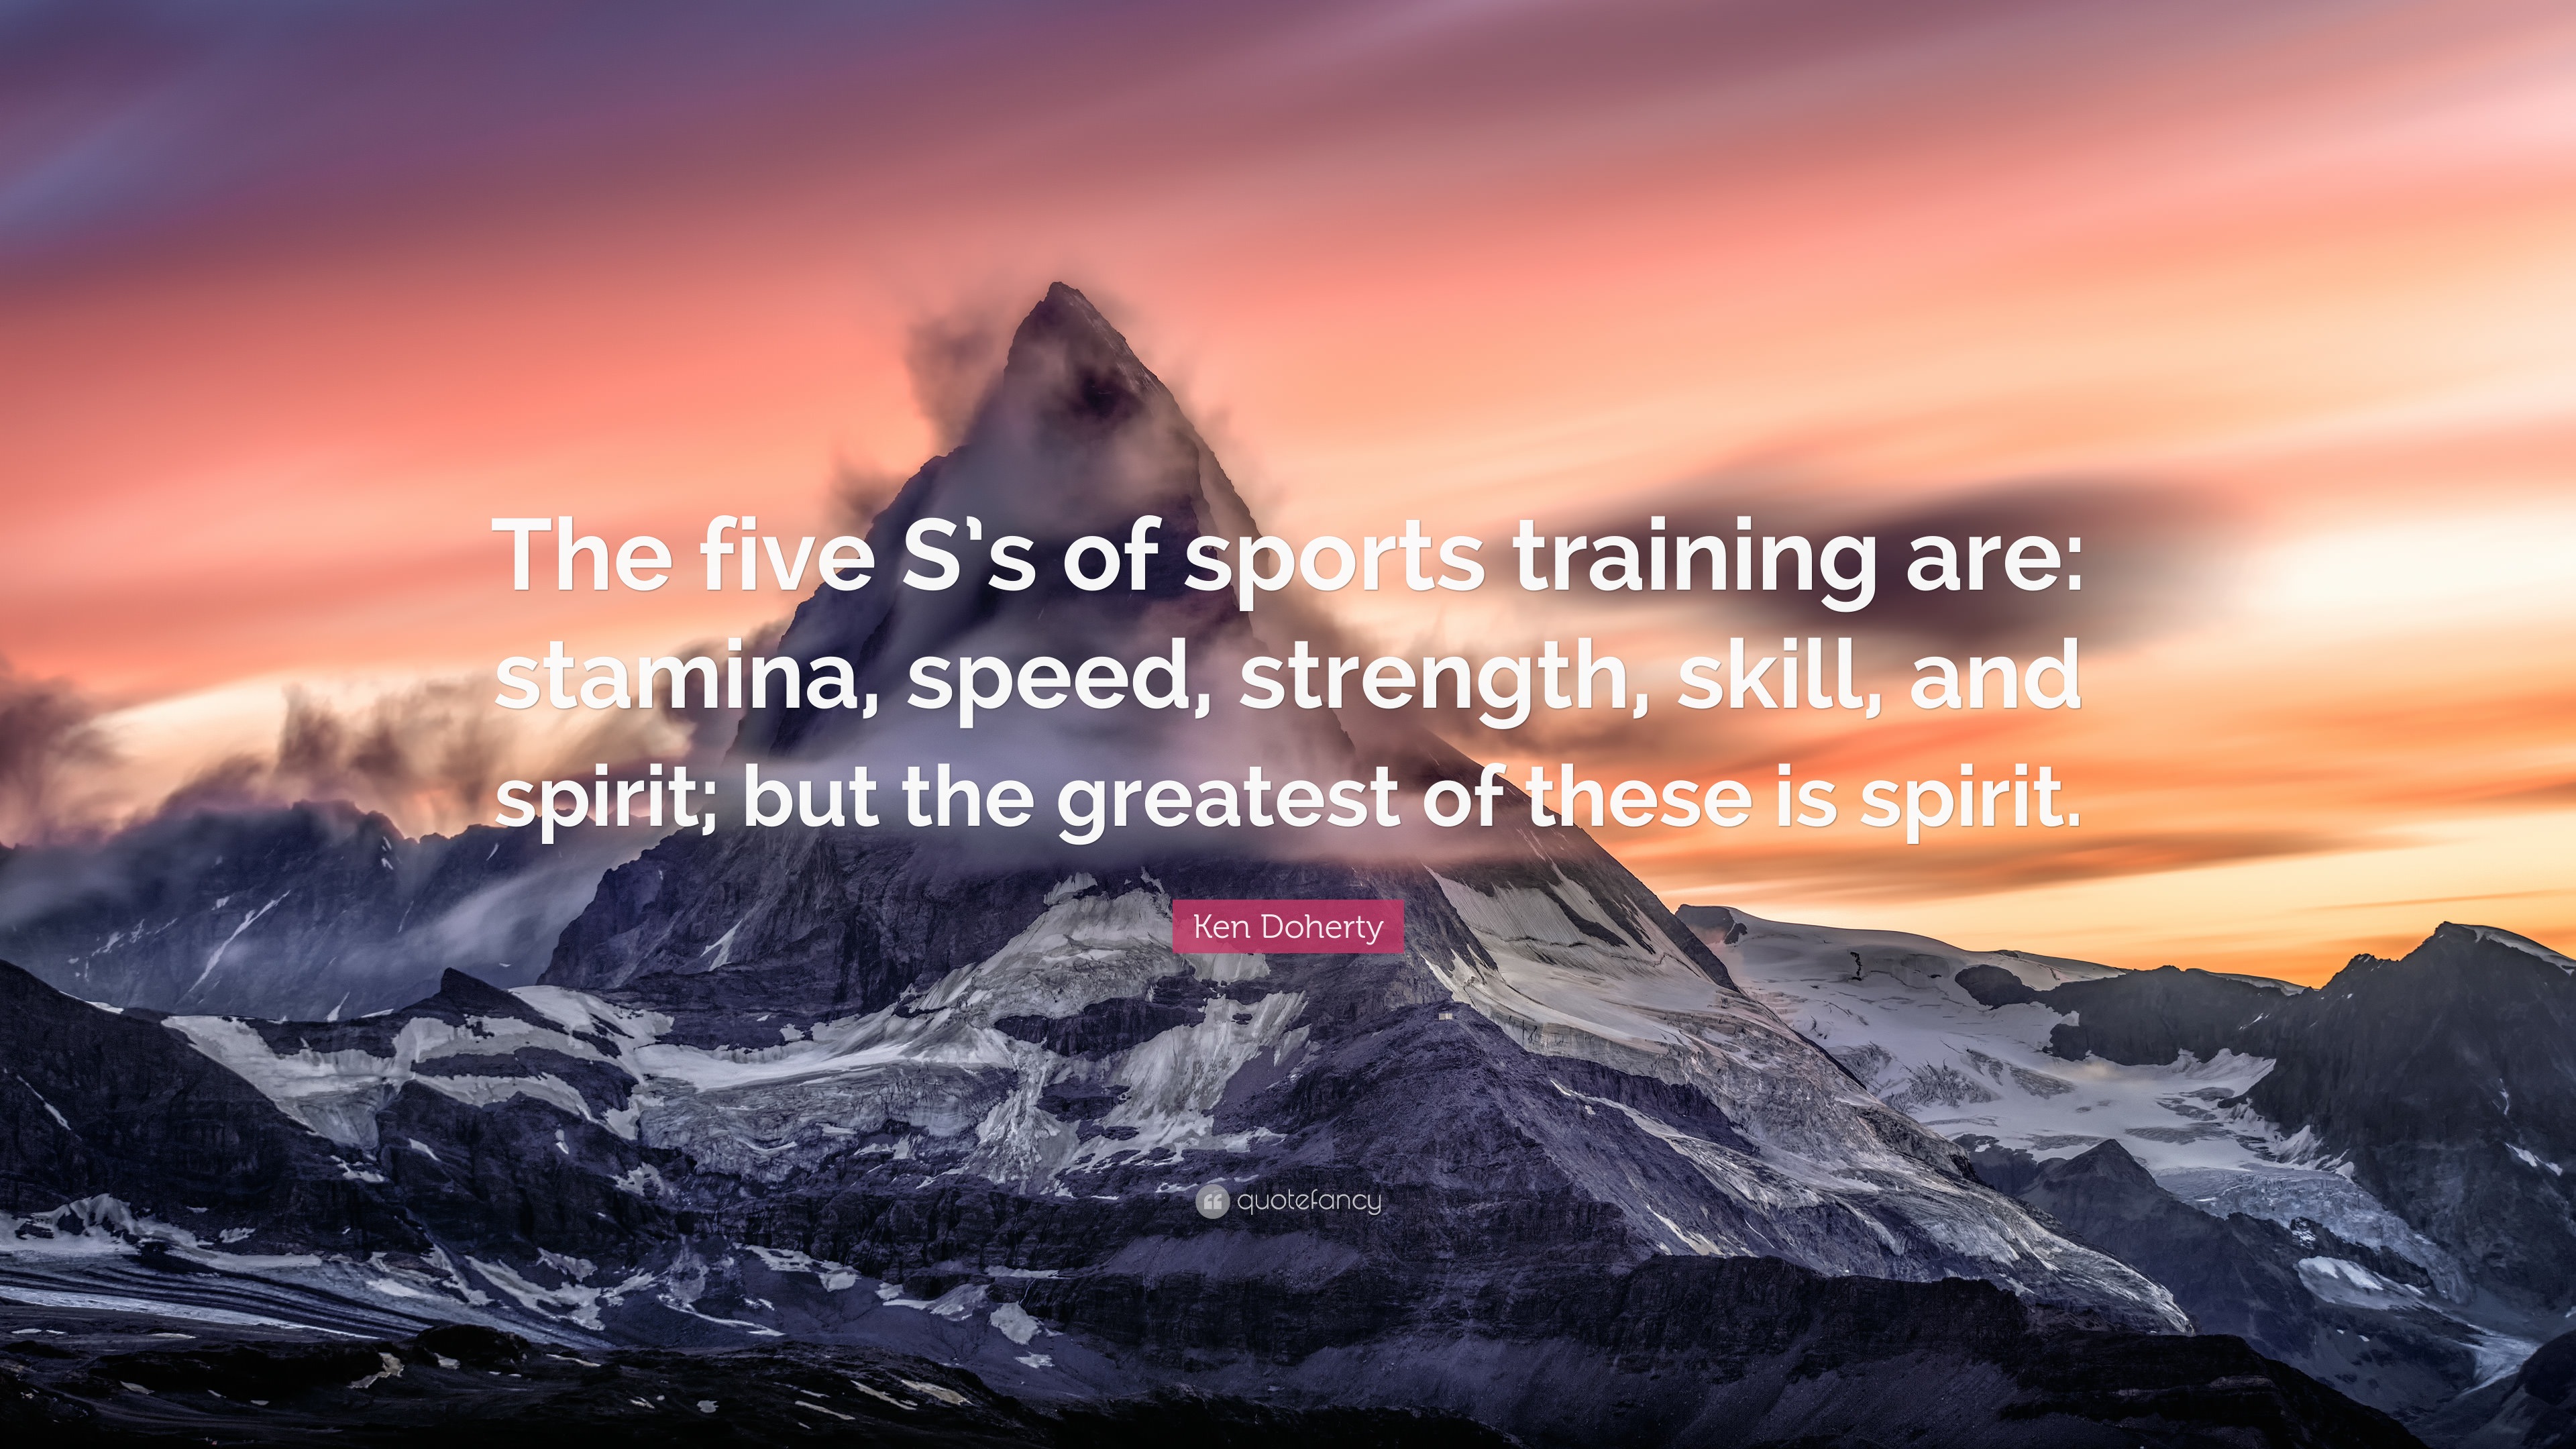 The five S's of sports training are: Stamina, Speed, Strength, Skill, and  Spirit; but the greatest of these is Spirit.” –Ken Doherty